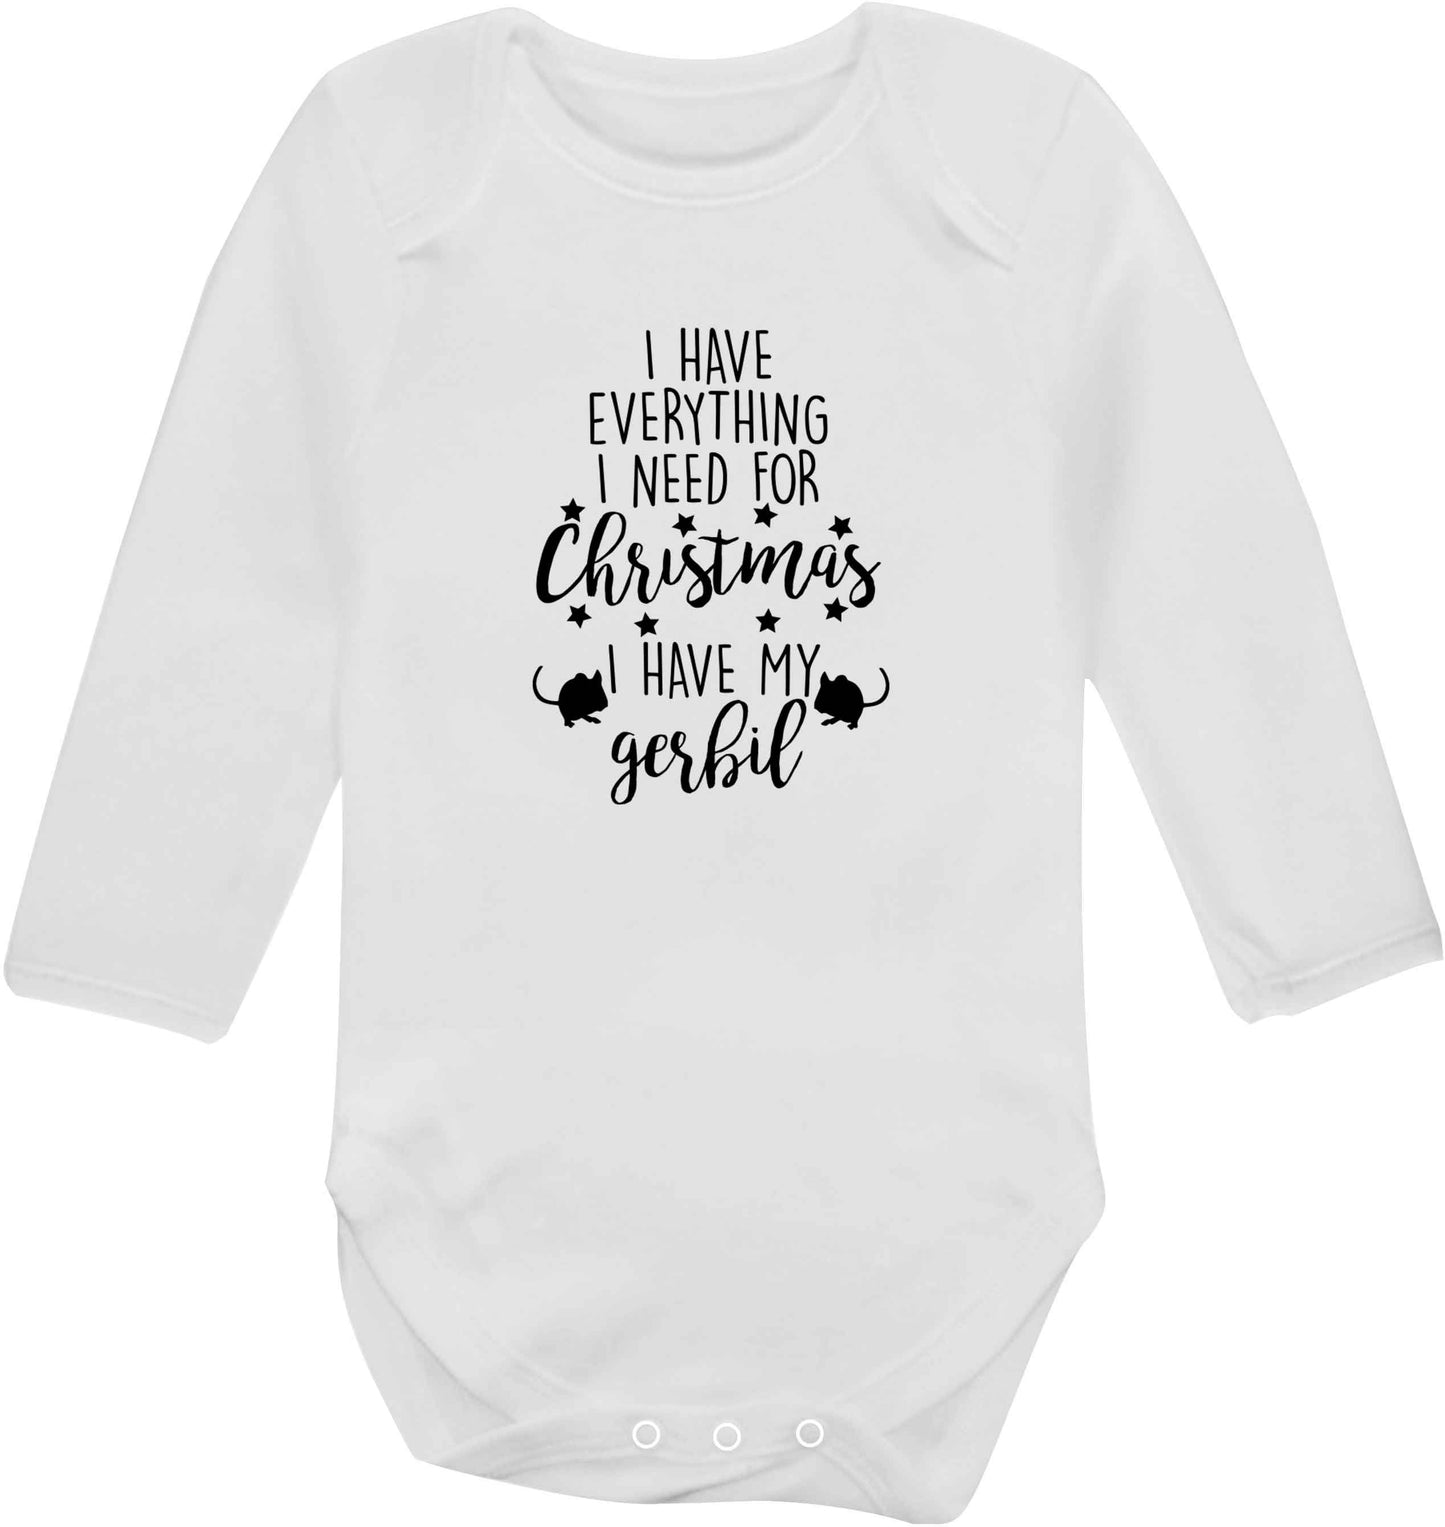 I have everything I need for Christmas I have my gerbil baby vest long sleeved white 6-12 months